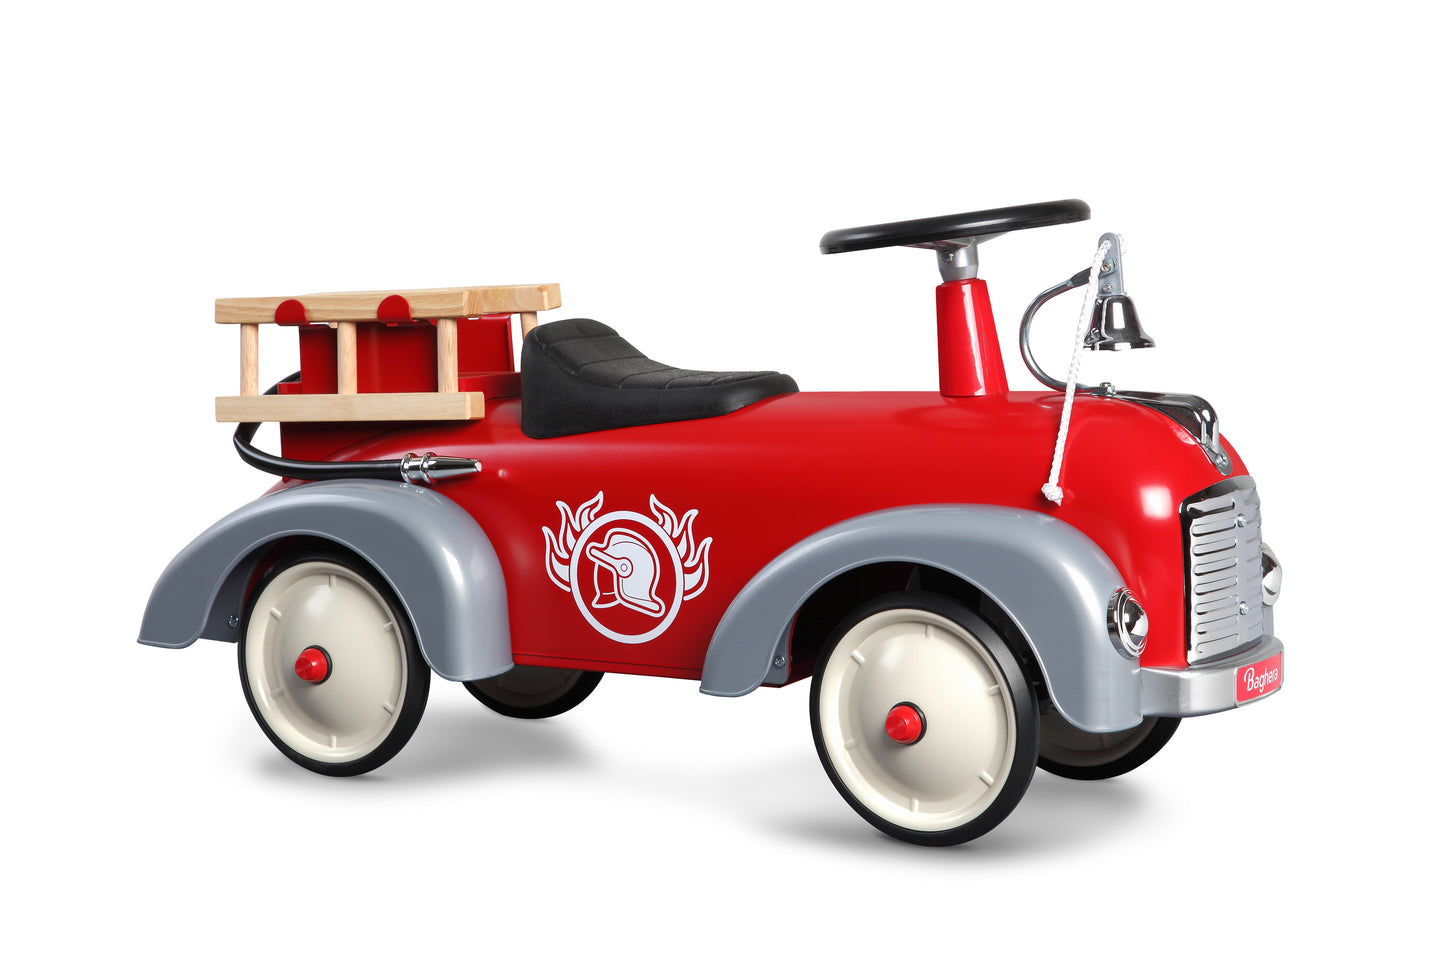 Toy fire truck for kids